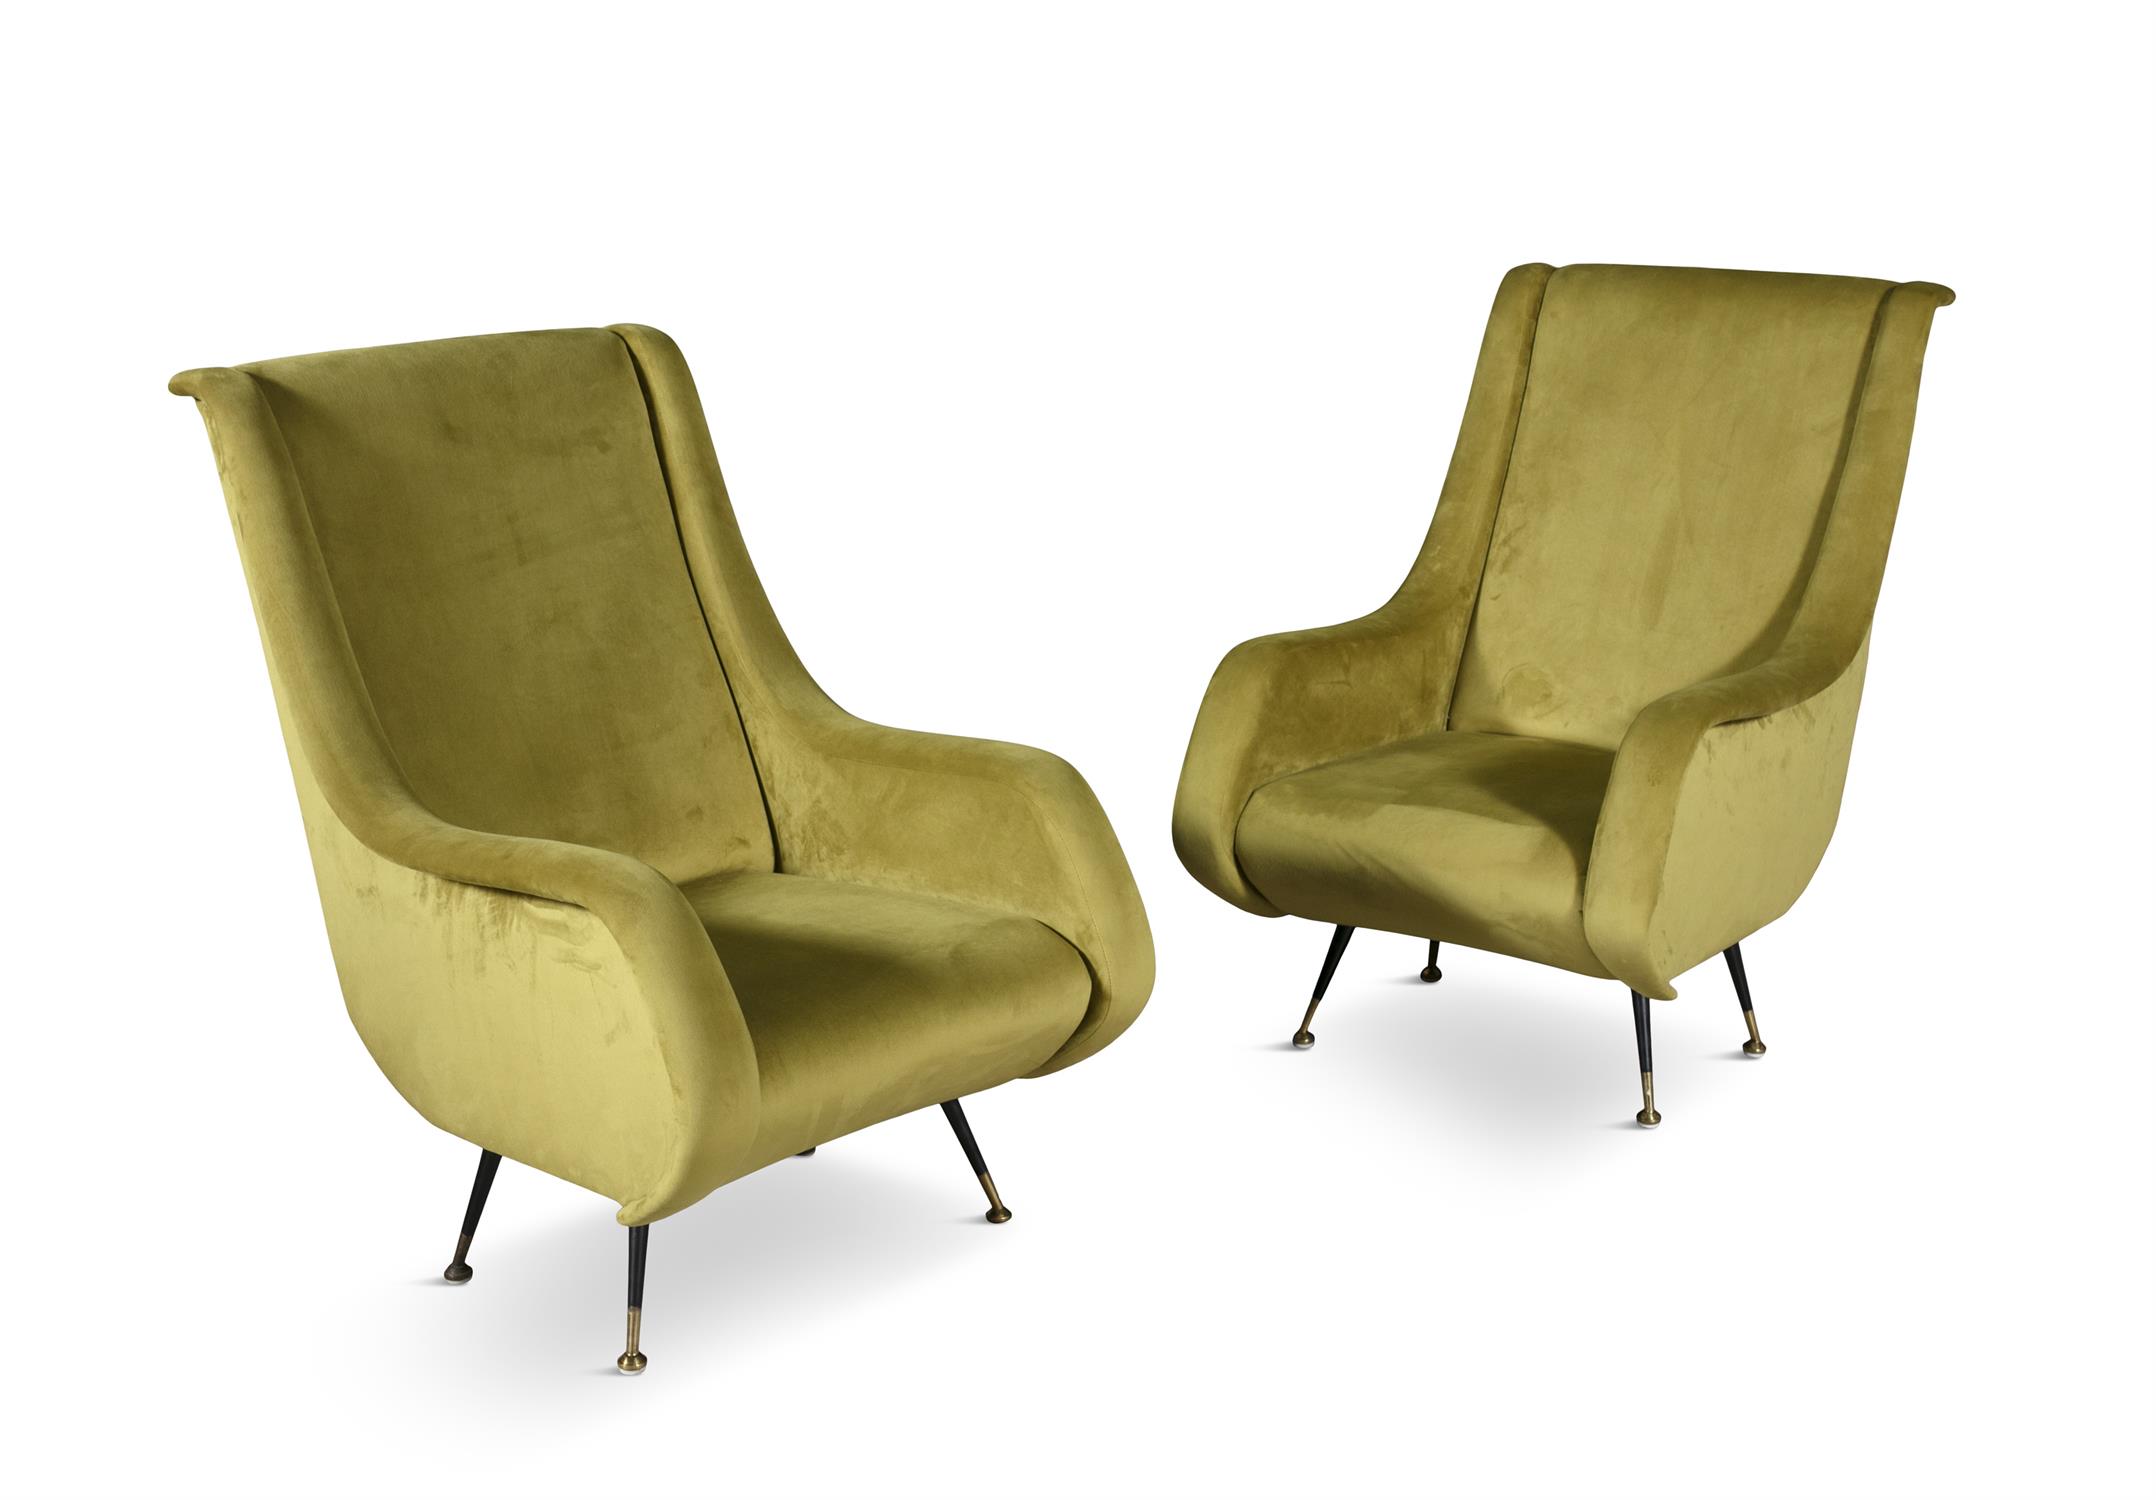 ARMCHAIRS A pair olive upholstered Italian armchairs. 67 x 90 x 97cm(h); seat 40cm(h)